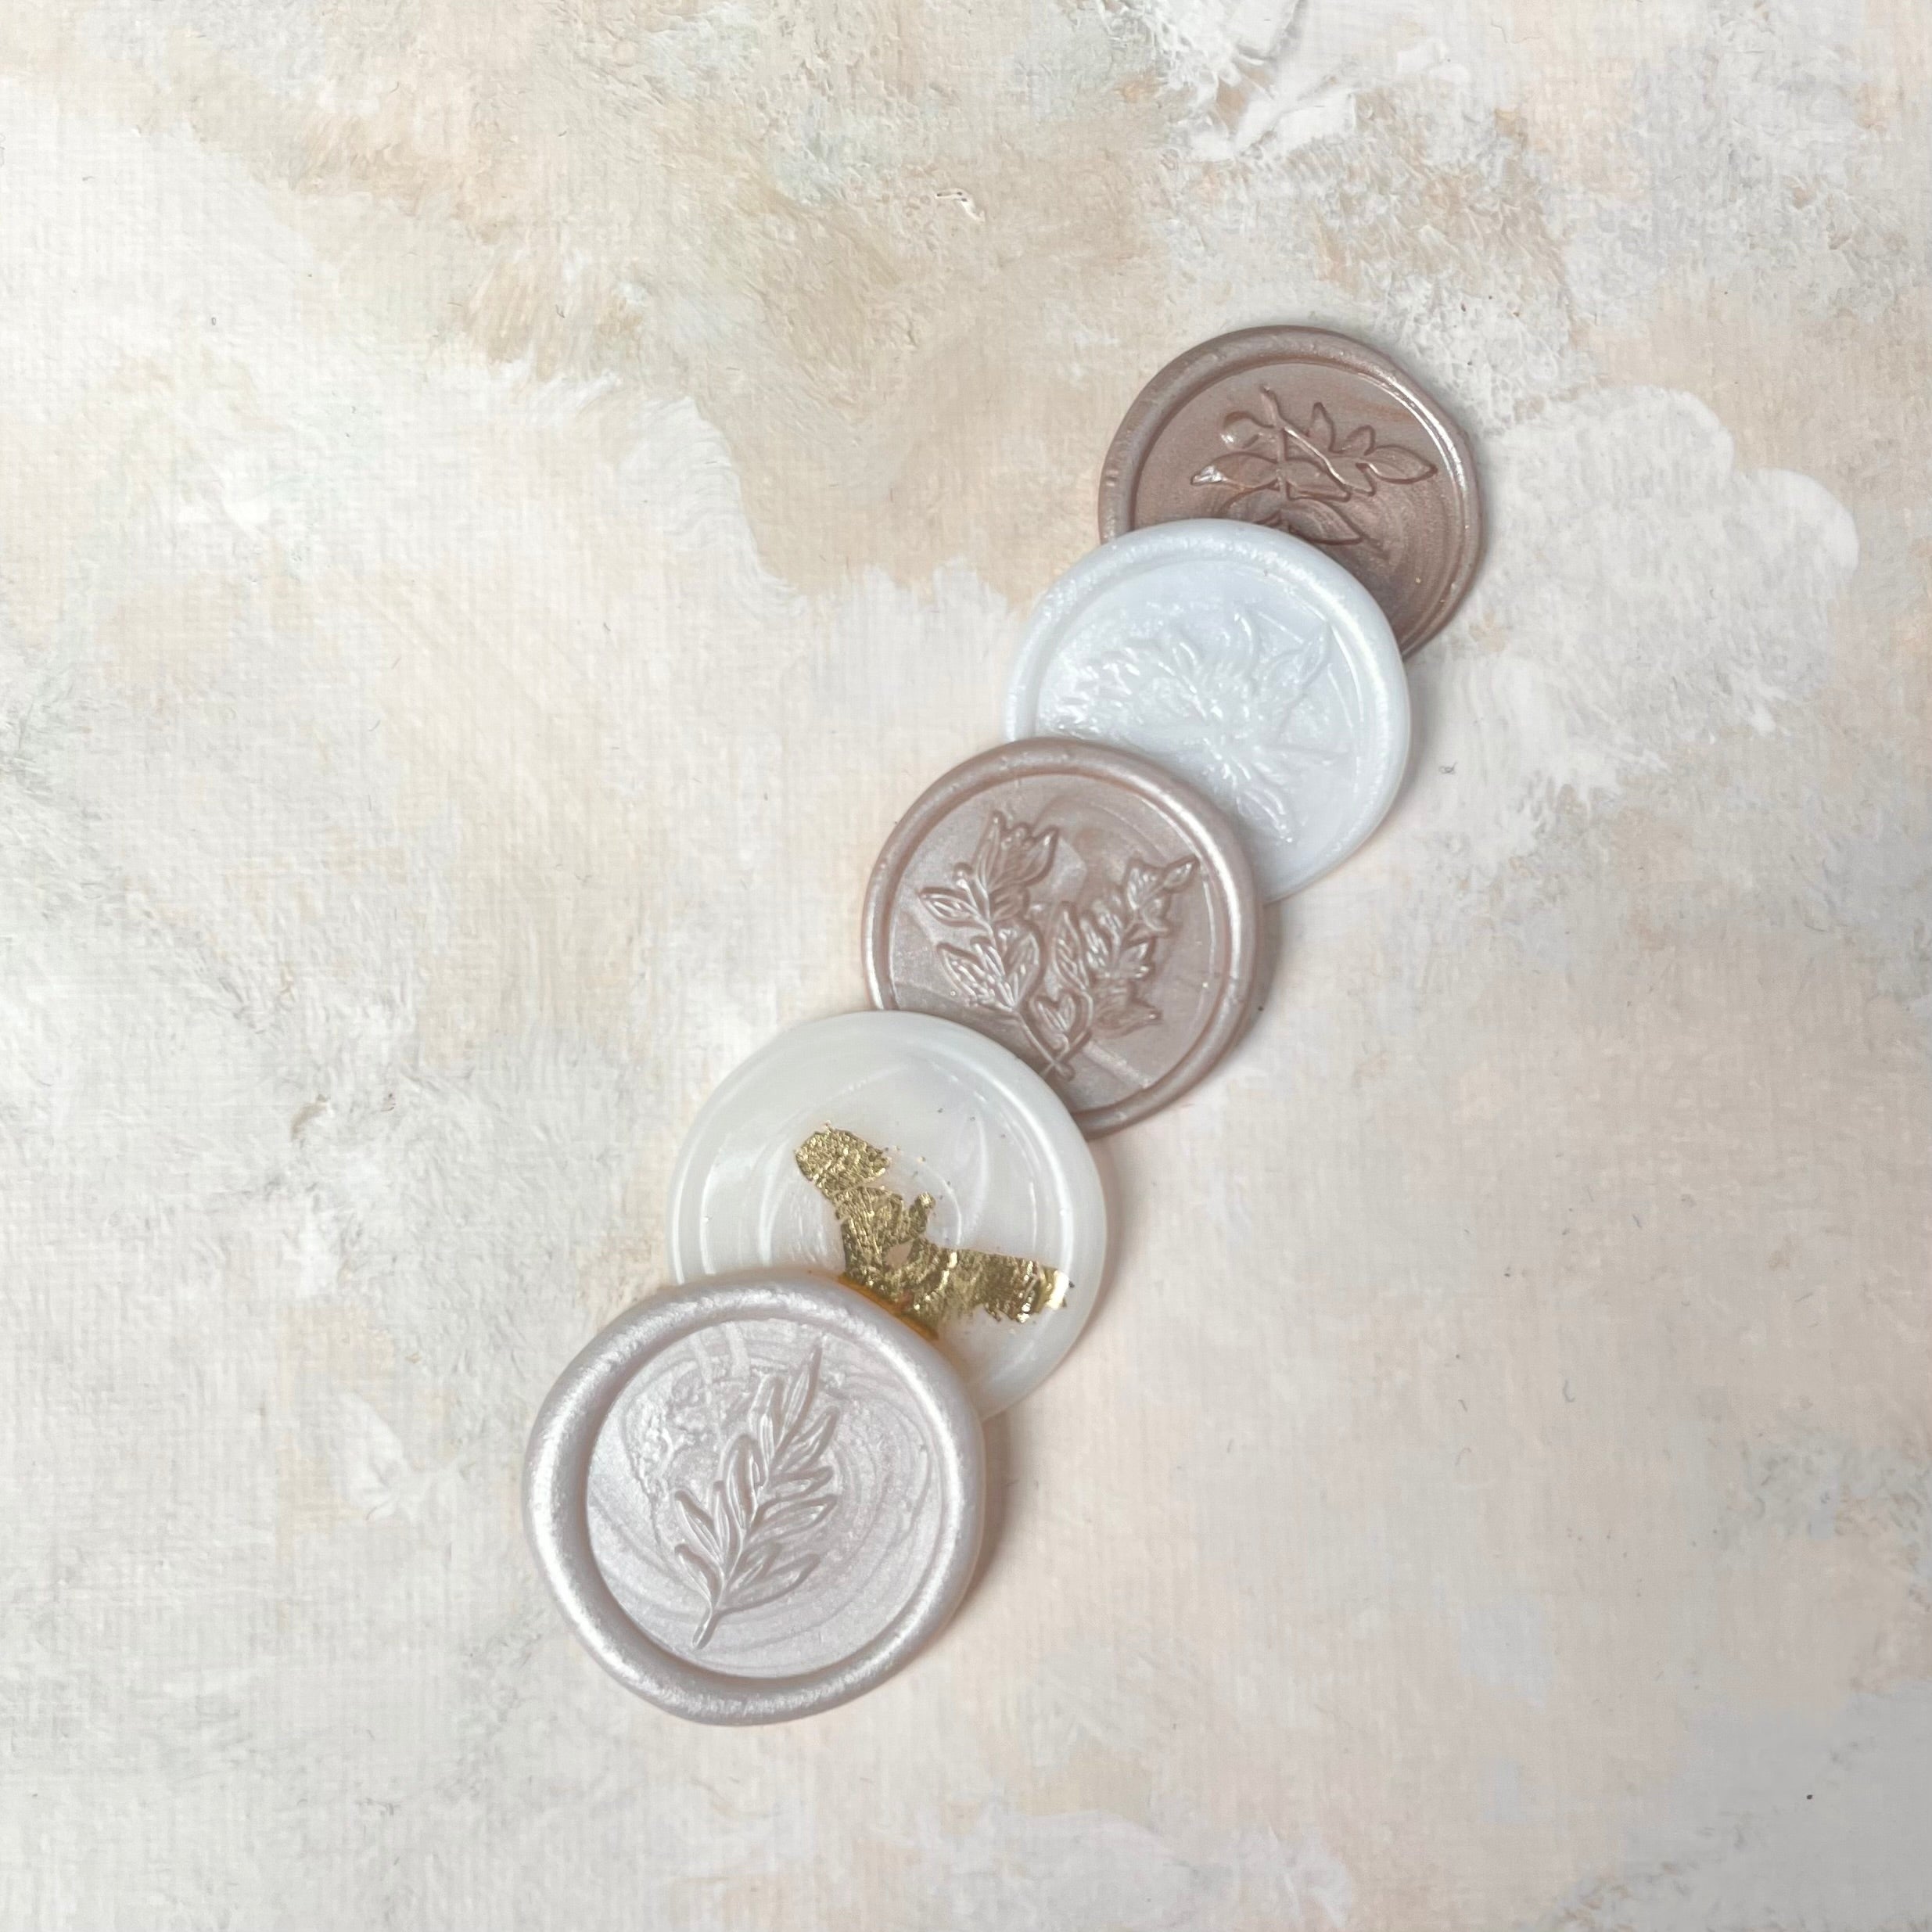 5 wax seals with leaf & floral design  - Wedding Flat lay props from Champagne & GRIT